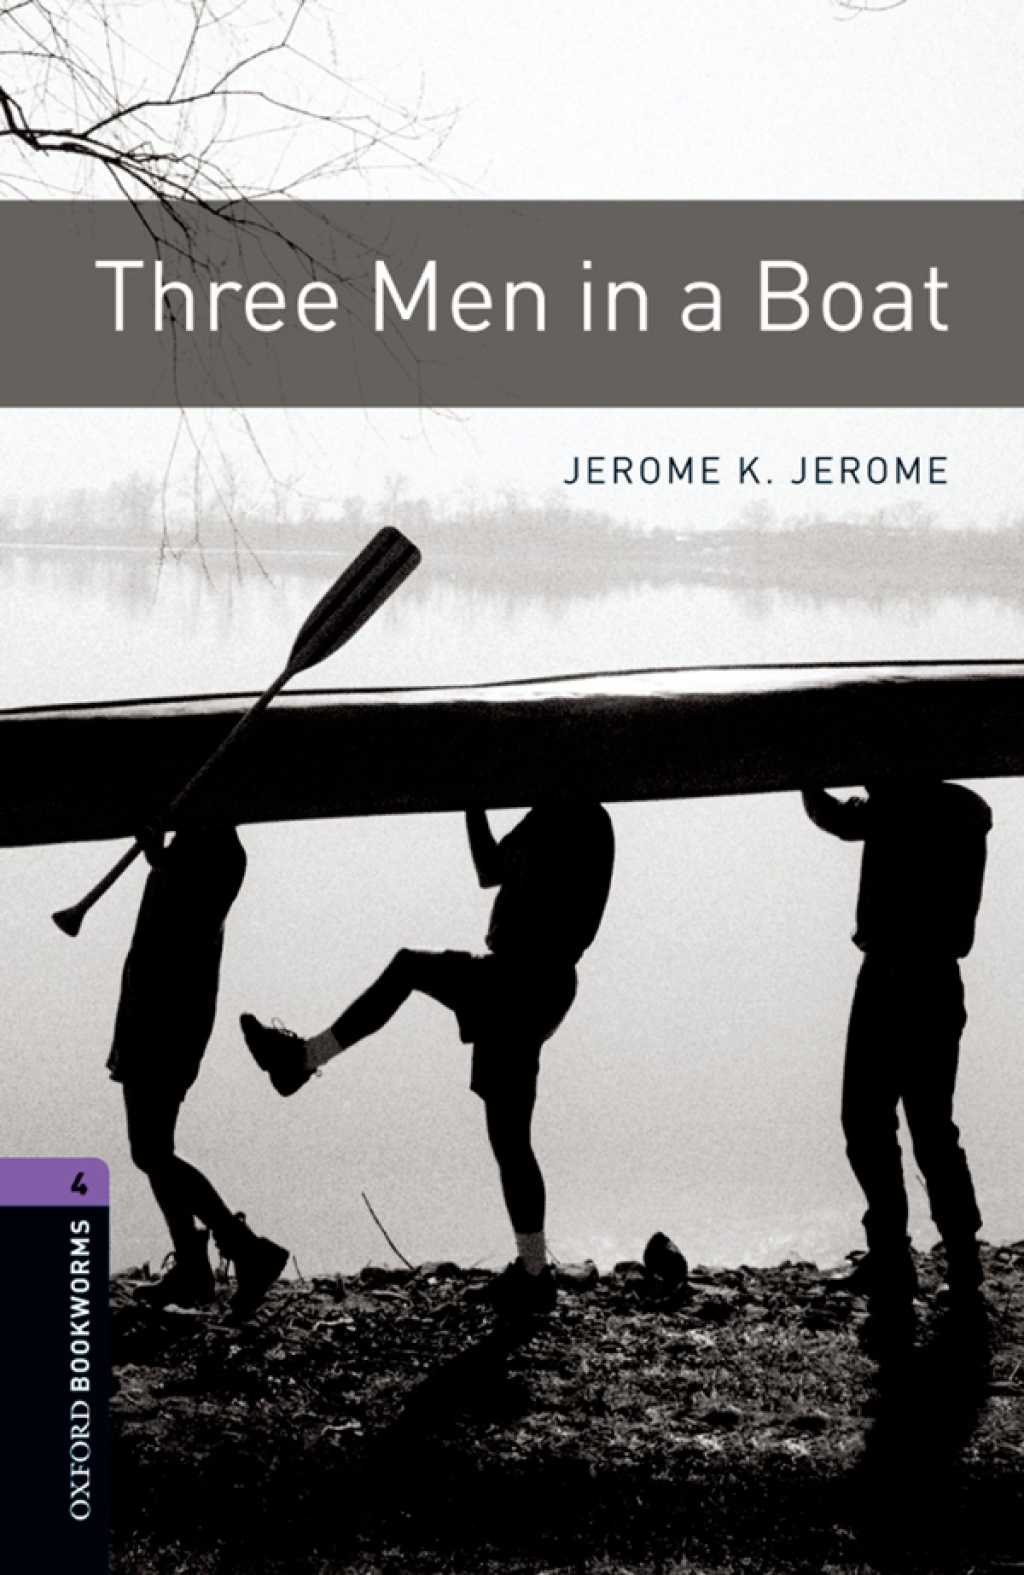 Three Men in a Boat Level 4 Oxford Bookworms Library - 3rd Edition (eBook Rental)